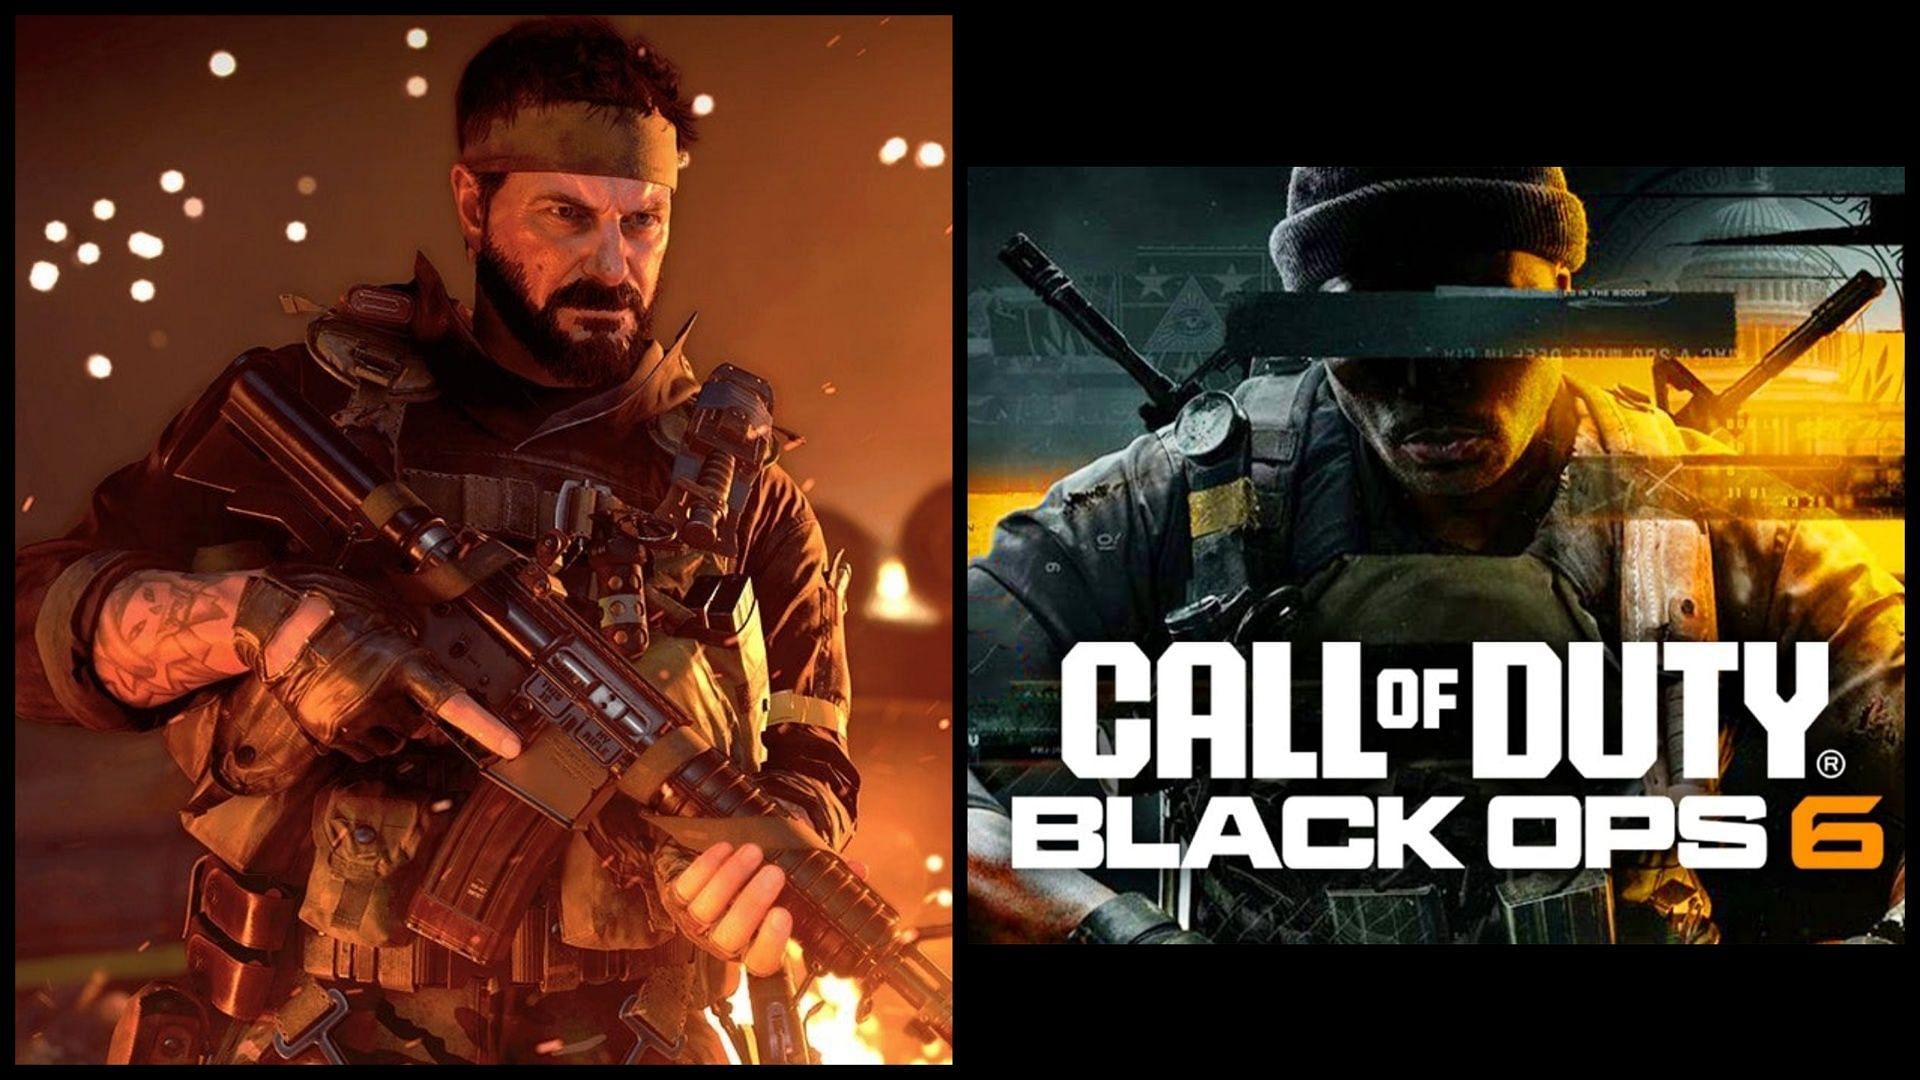 Black Ops 6 campaign will reportedly be open world